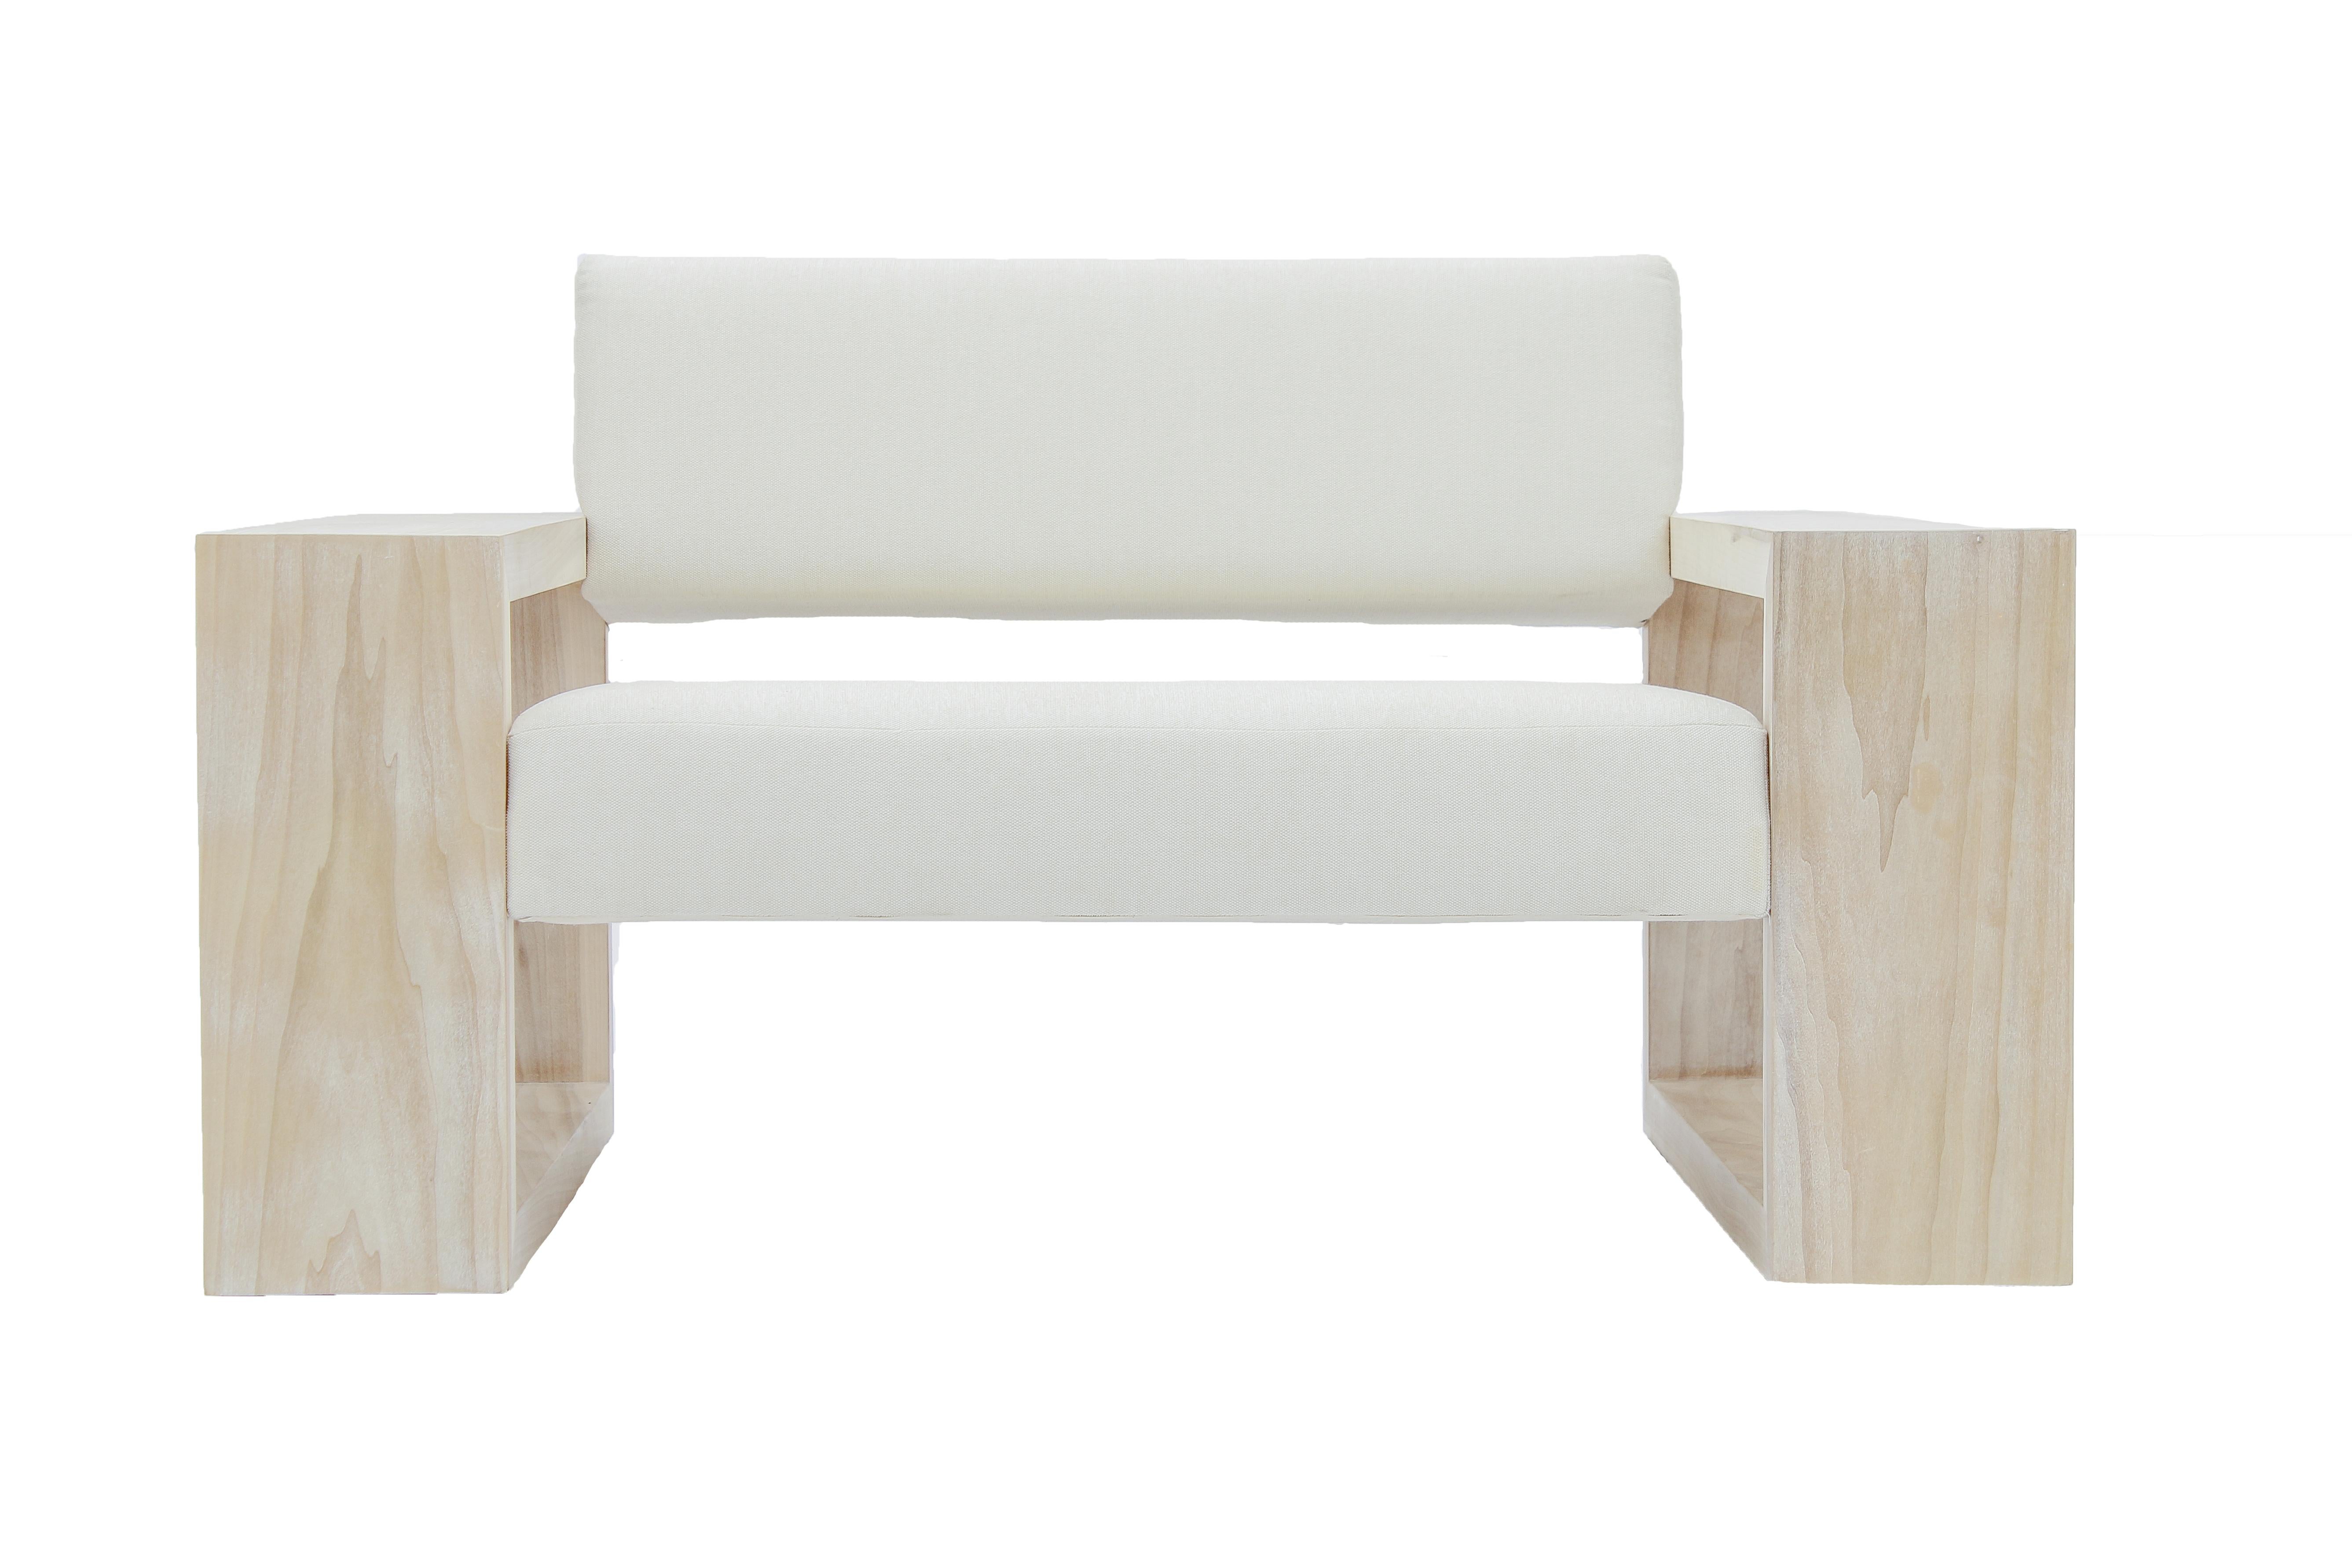 James de Wulf Le Blanc

The LeBlanc series was originally designed by James de Wulf in 2015. The large, minimal pieces are deceptively comfortable. The solid wood construction of the signature arms and legs allows the seat and backrest to float;